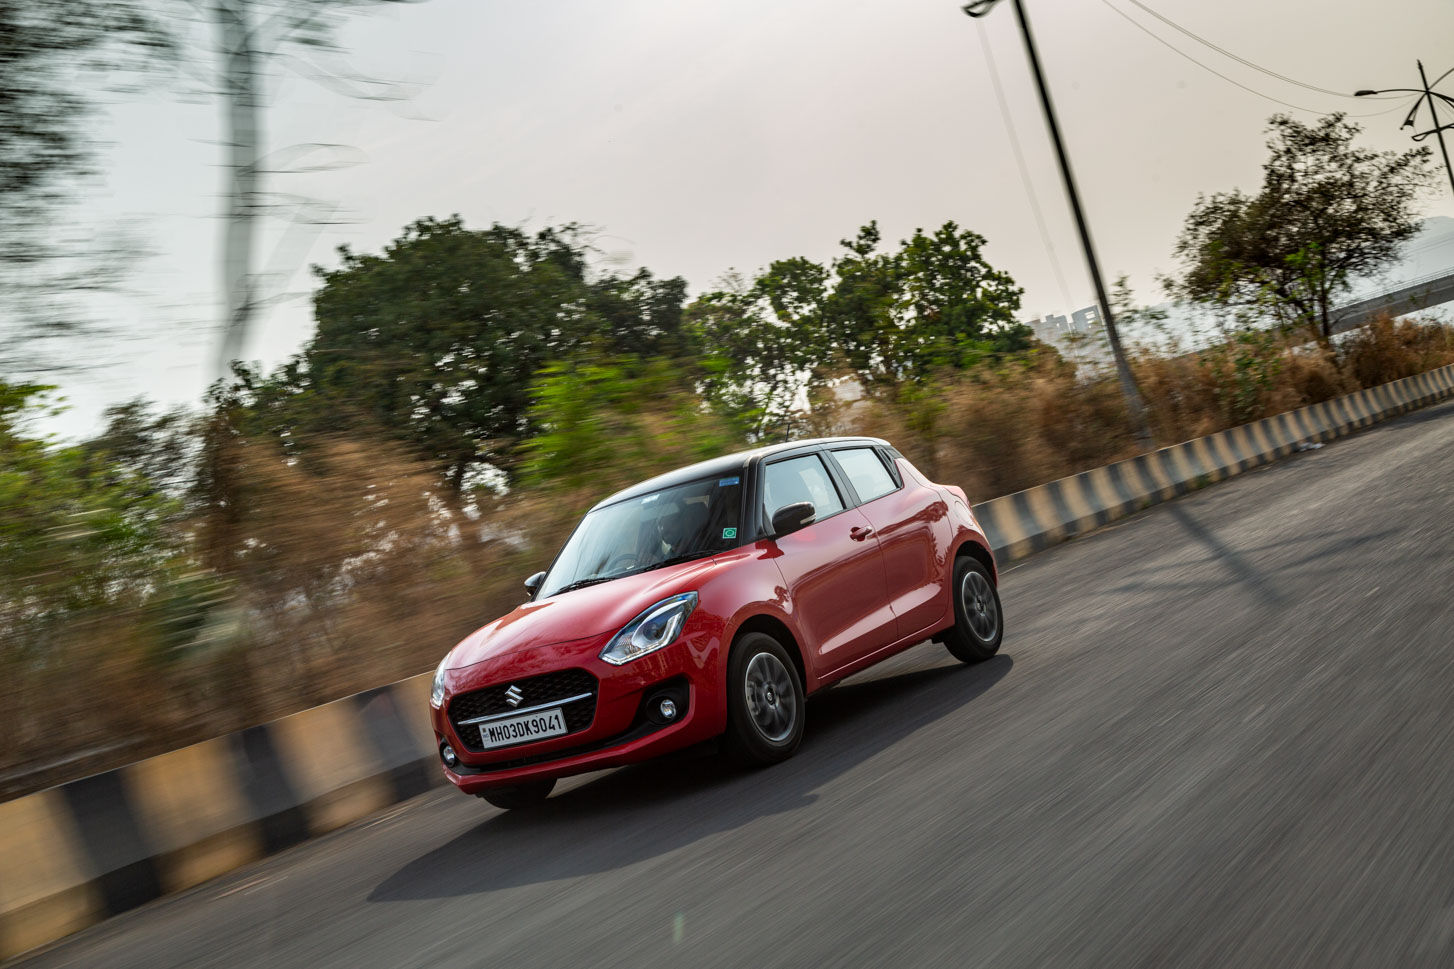 1 Maruti Swift Road Test Reviews from Experts 